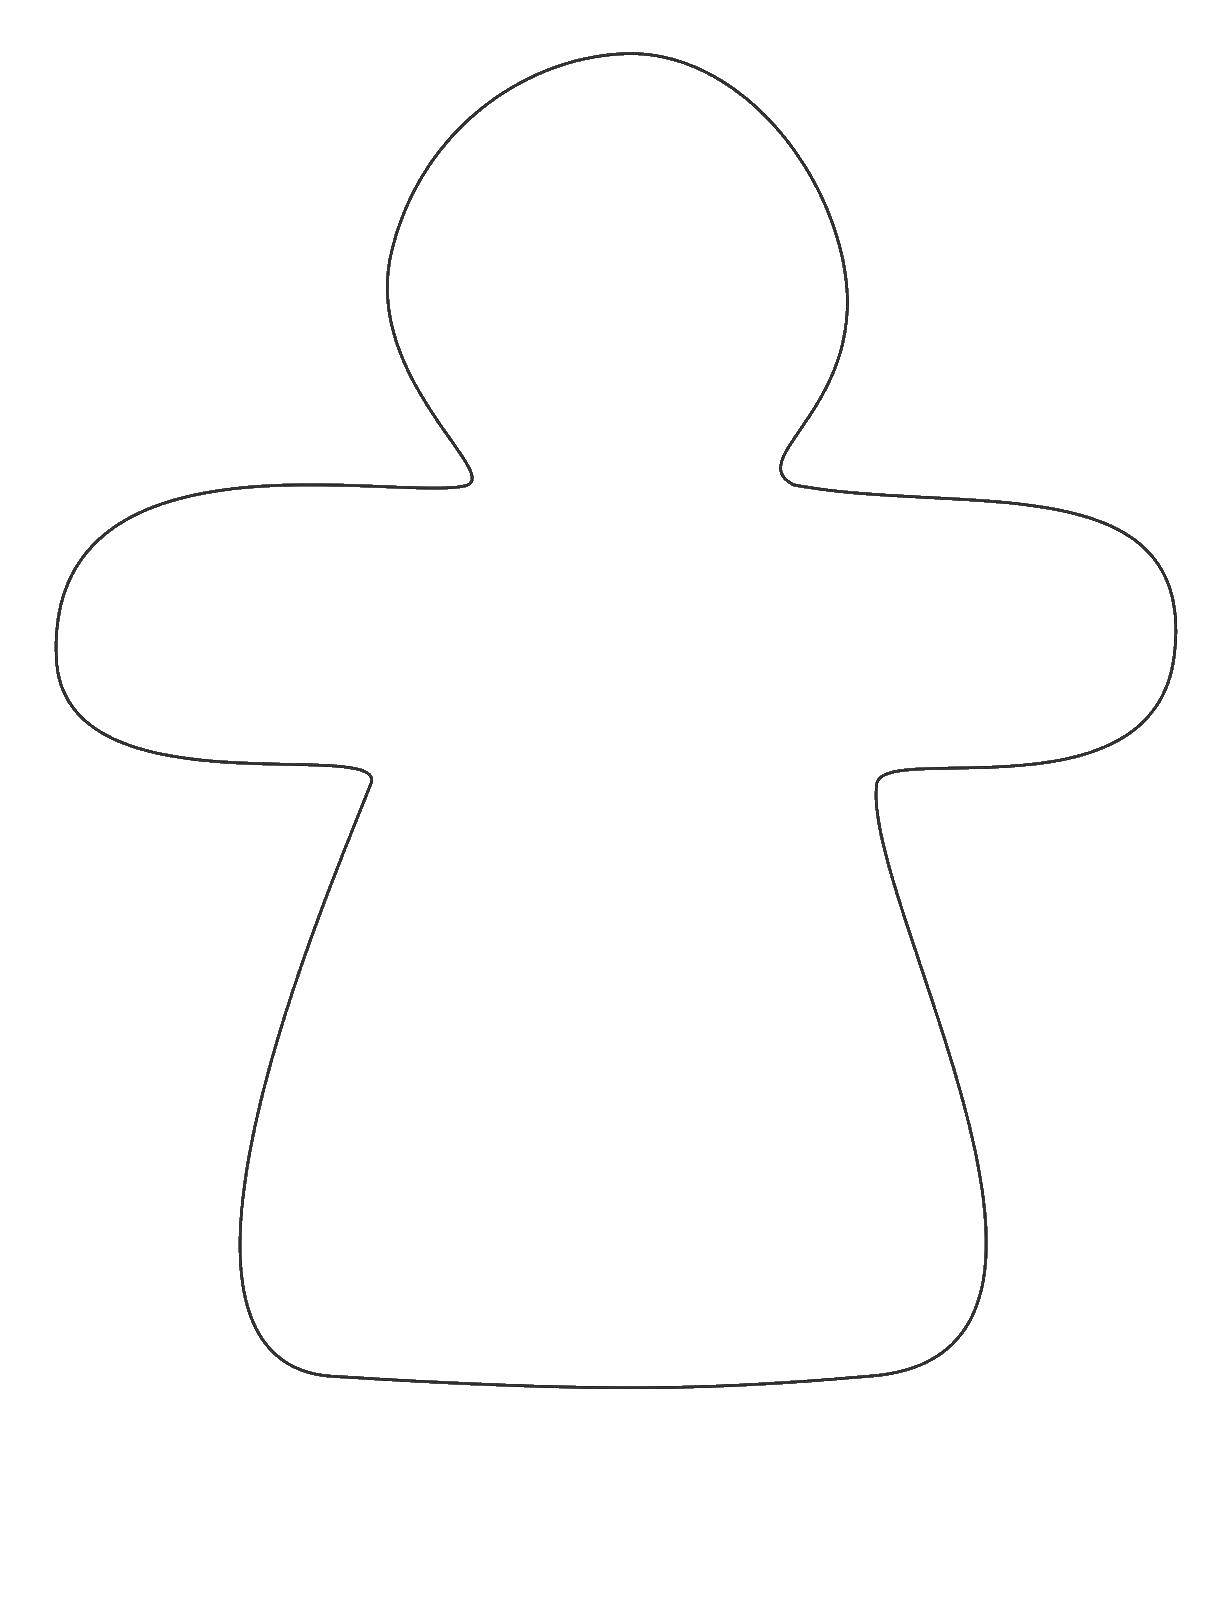 Coloring Simple doll to cut out. Category The contour of the doll . Tags:  doll.